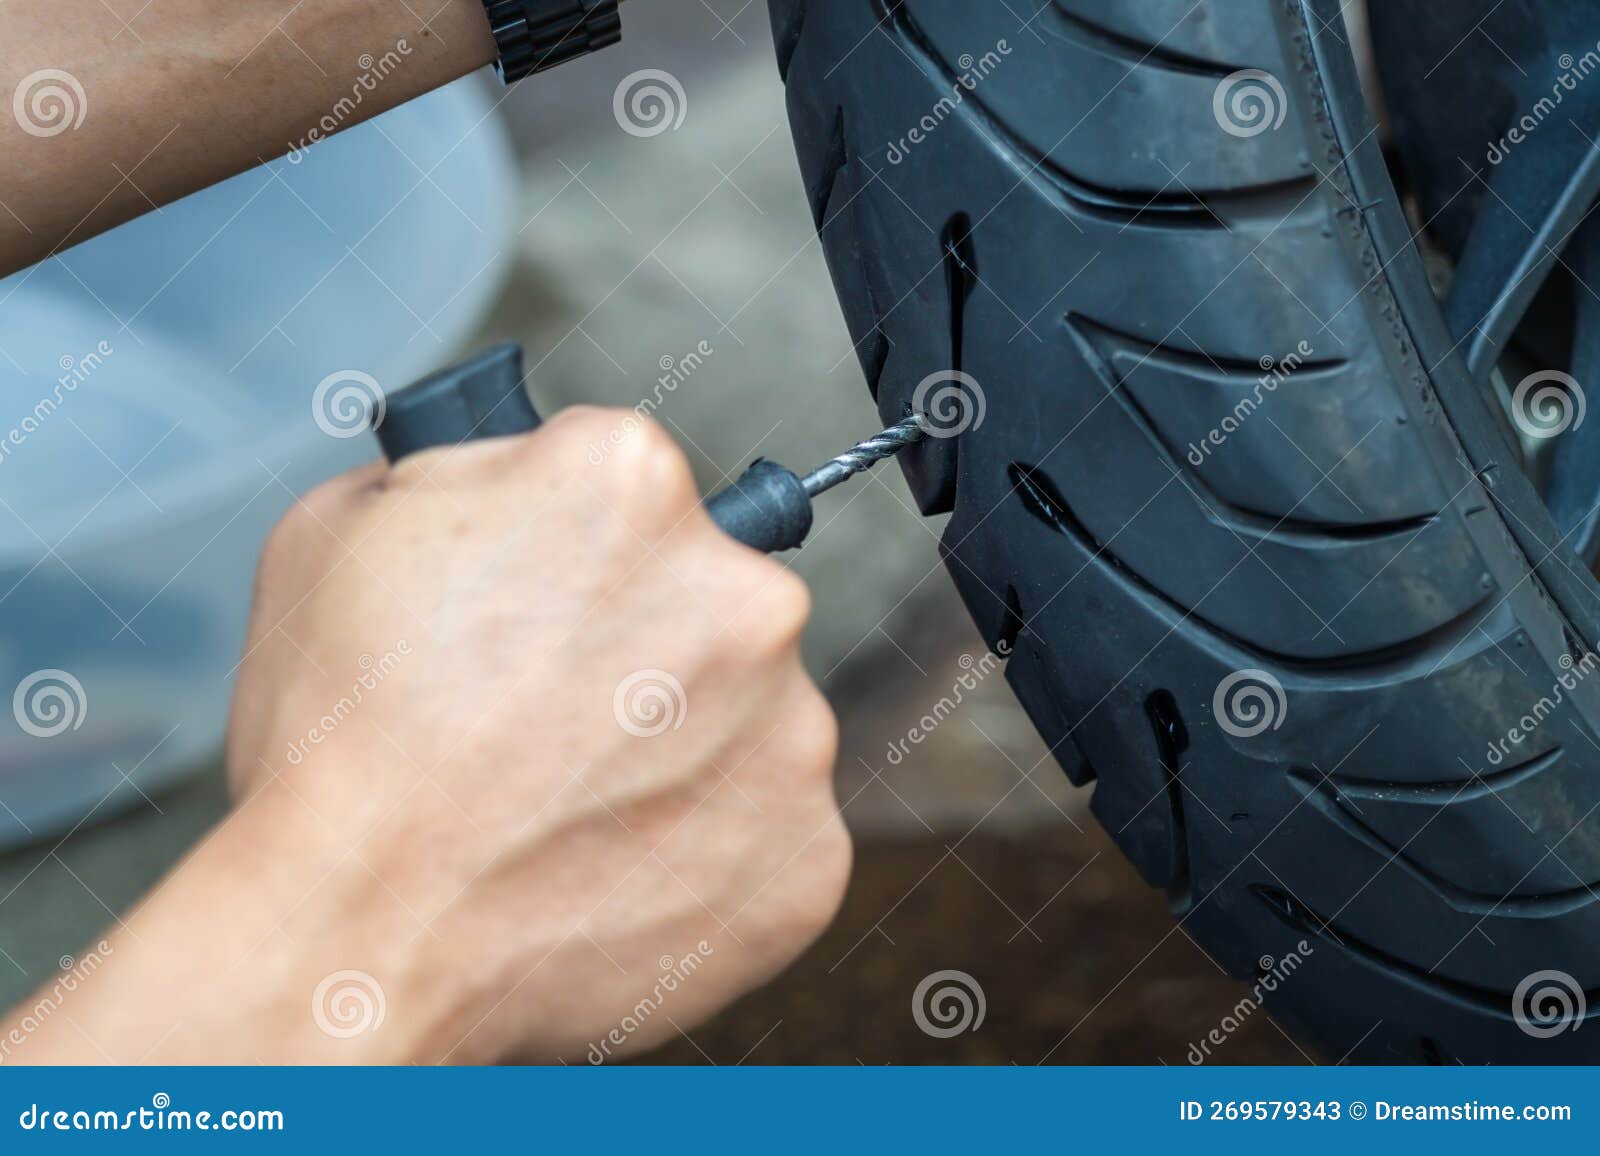 rider use tire plug kit and trying to fix a hole in tire's sidewall ,repair a motorcycle flat tire in the garage. motorcycle